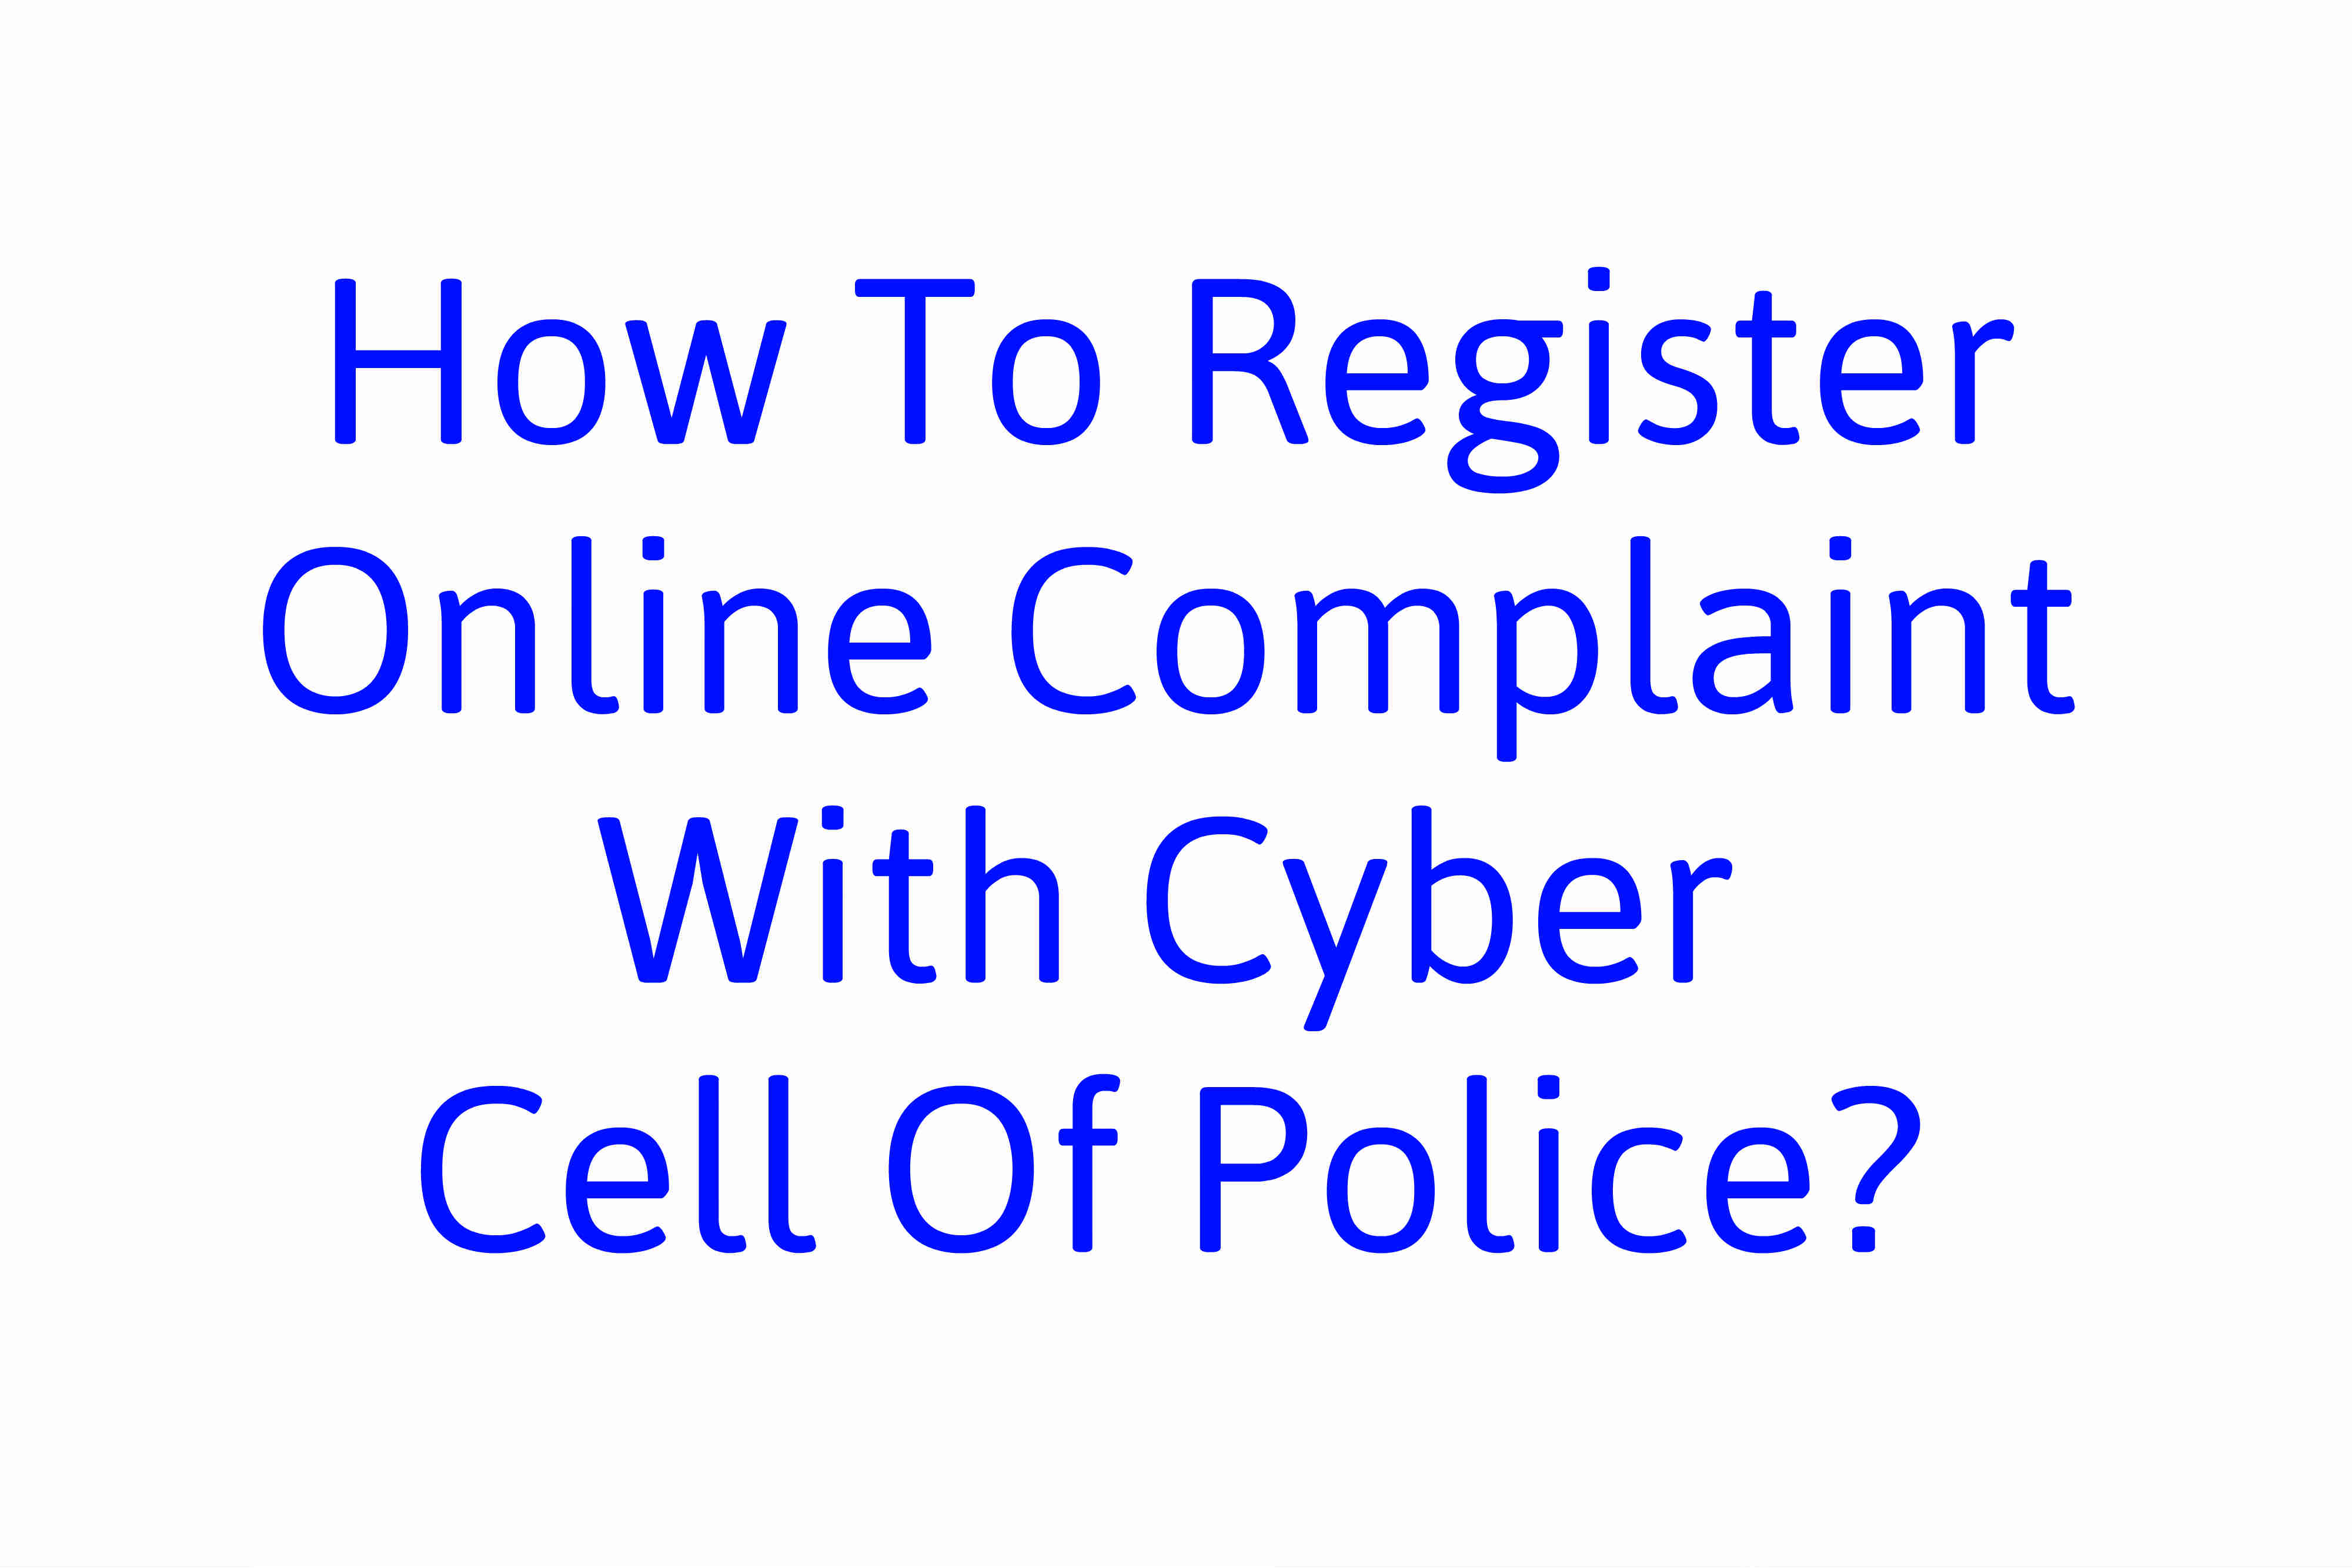 How To Register Online Complaint With Cyber Cell Of Police